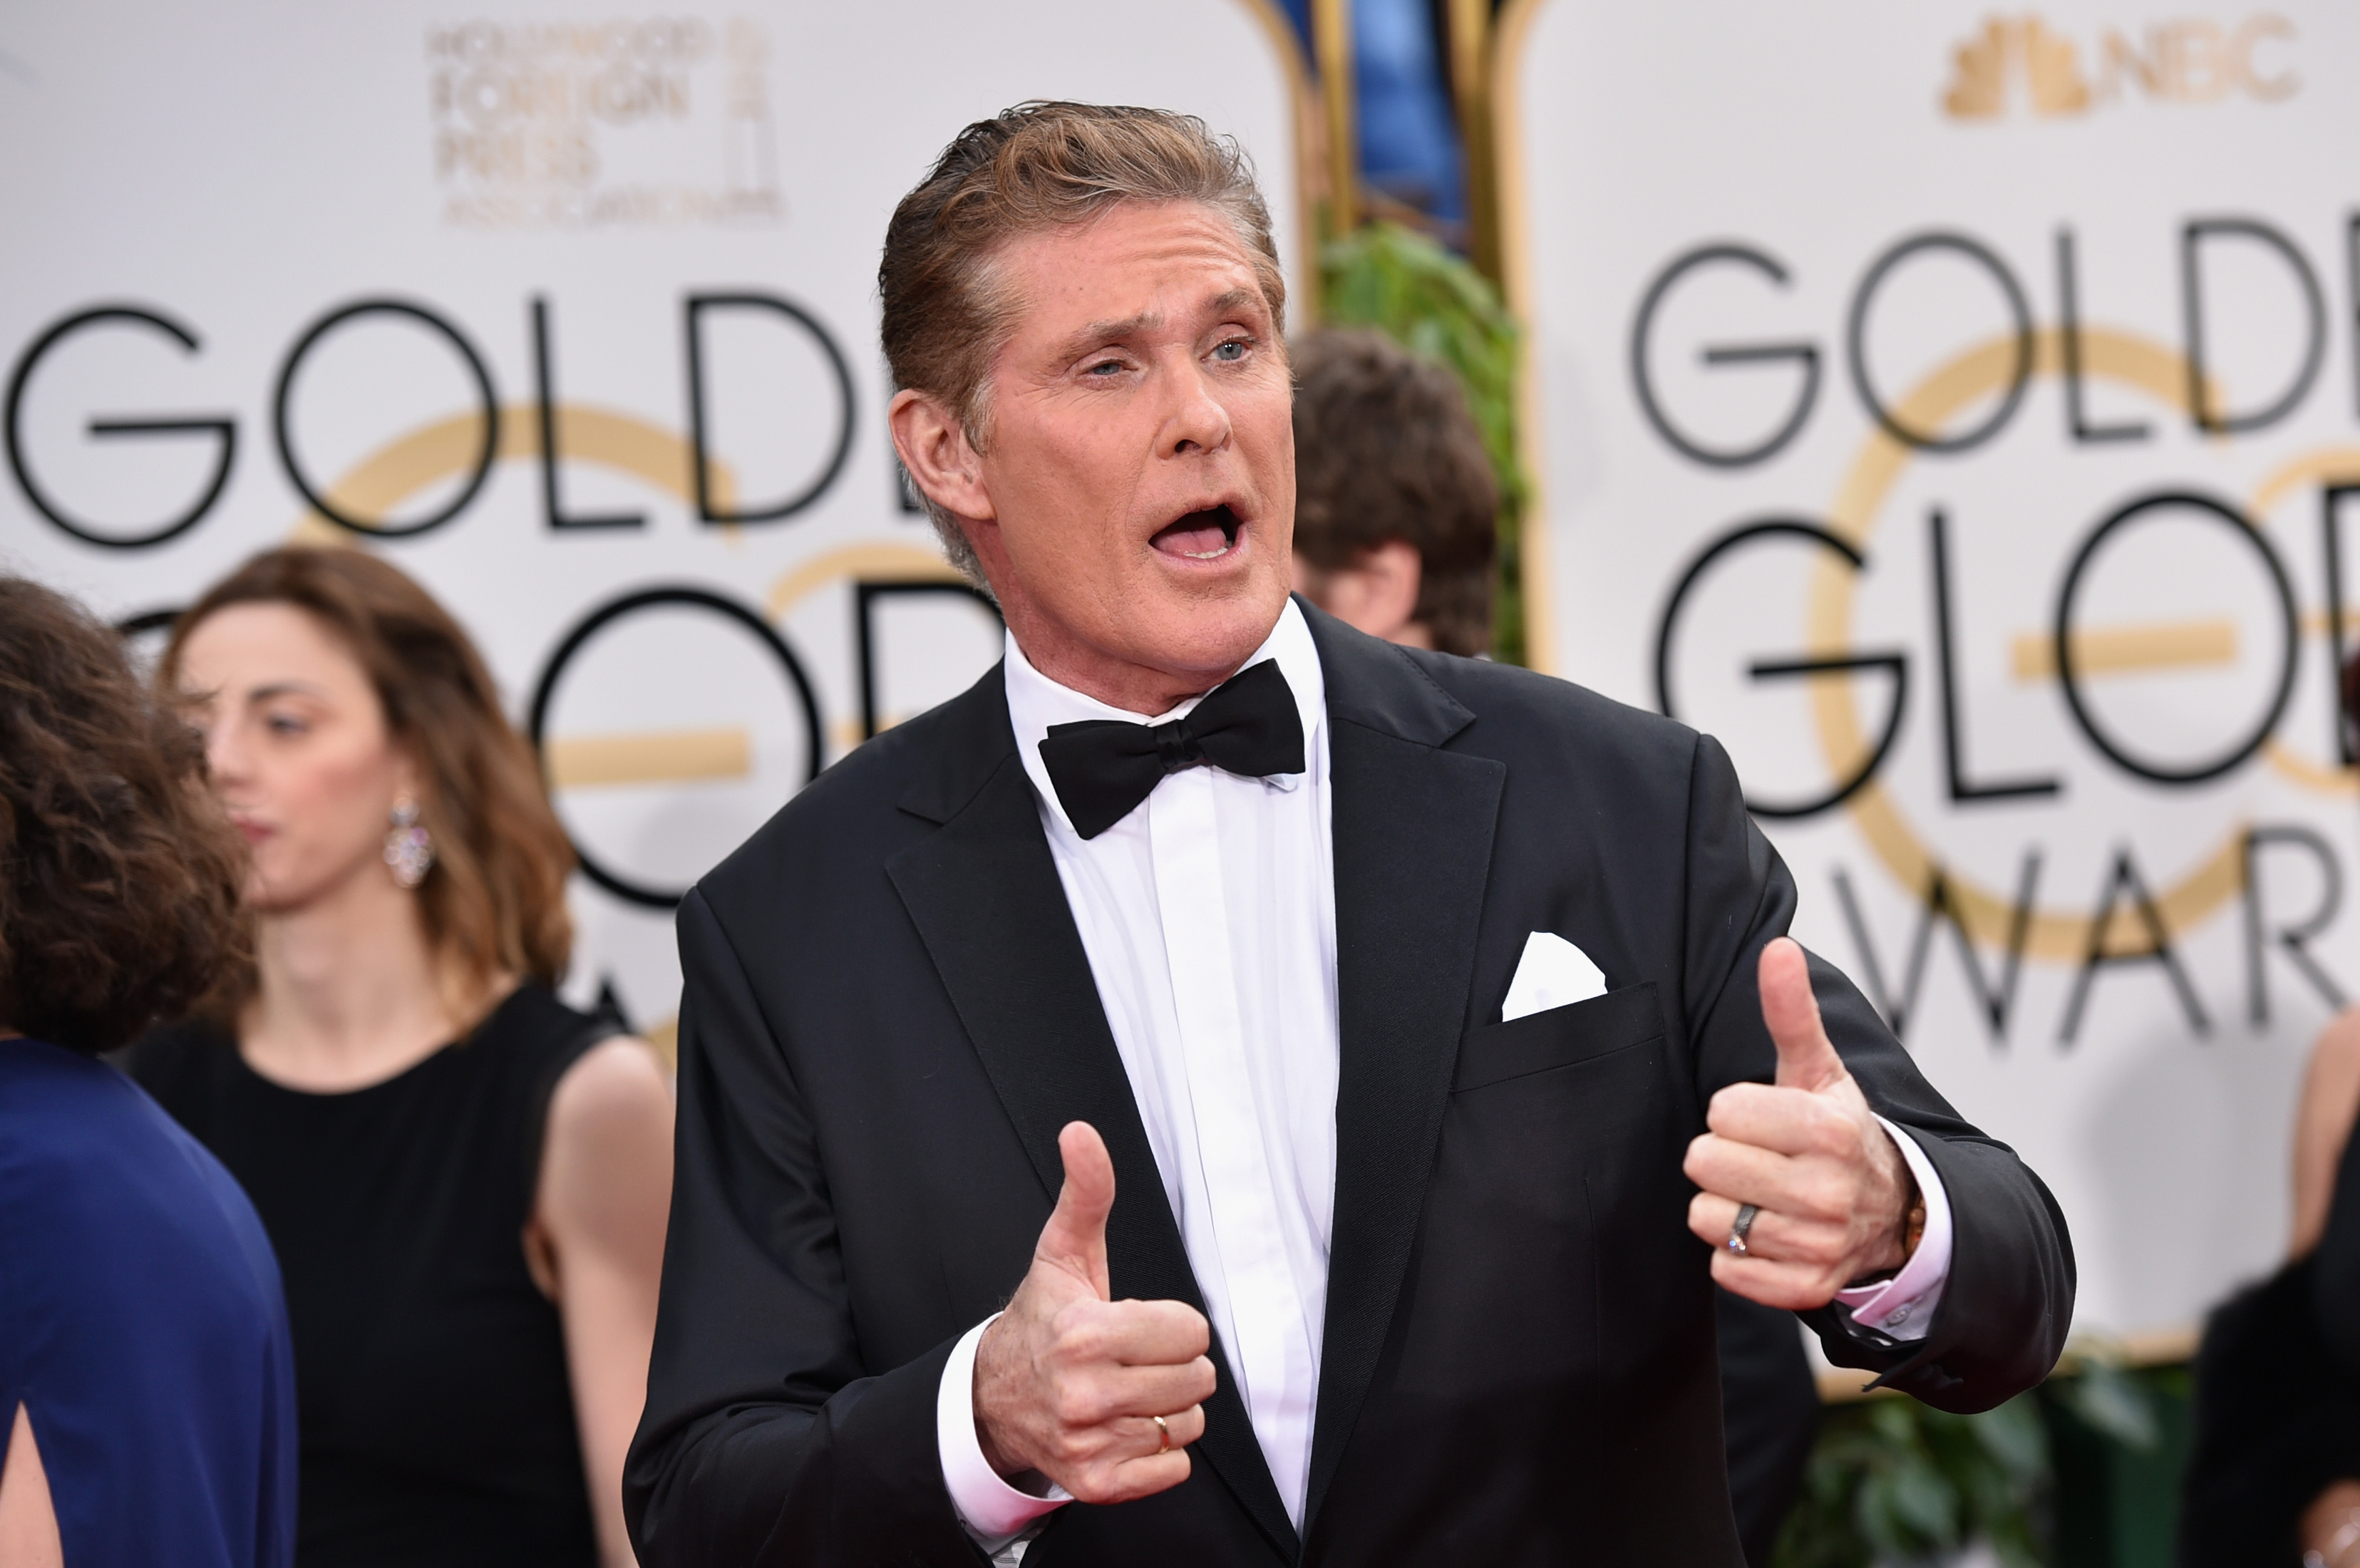 Actor David Hasselhoff attends the 73rd Annual Golden Globe Awards held at the Beverly Hilton Hotel on January 10, 2016 in Beverly Hills, California. (John Shearer—Getty Images)